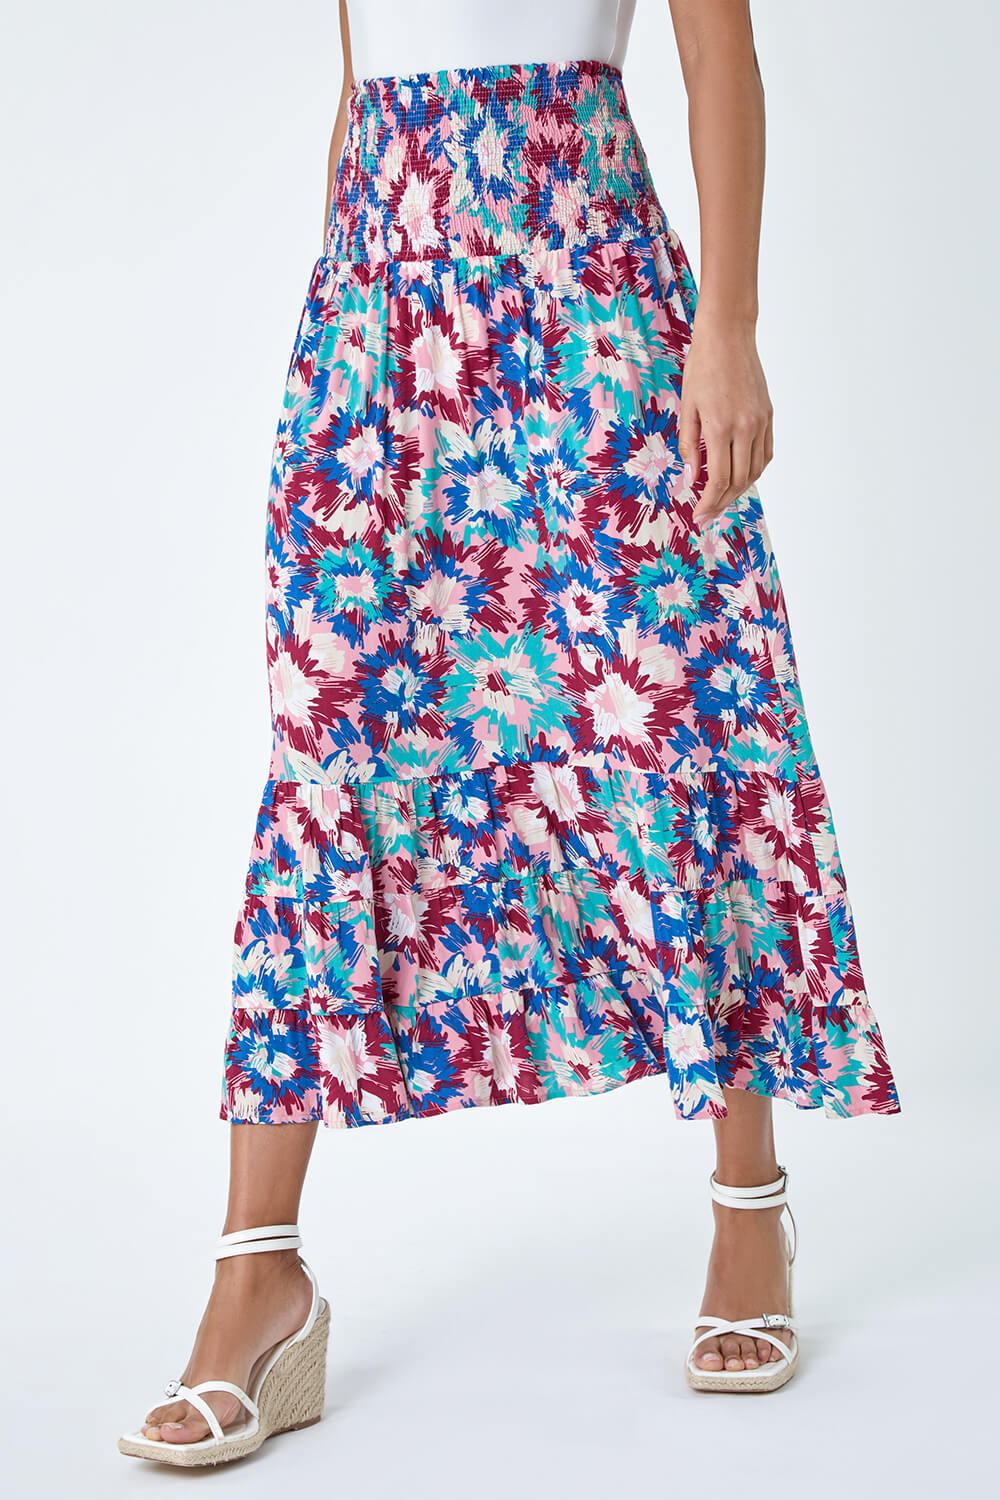 Blue Abstract Print Shirred Multiway Skirt Dress, Image 4 of 6